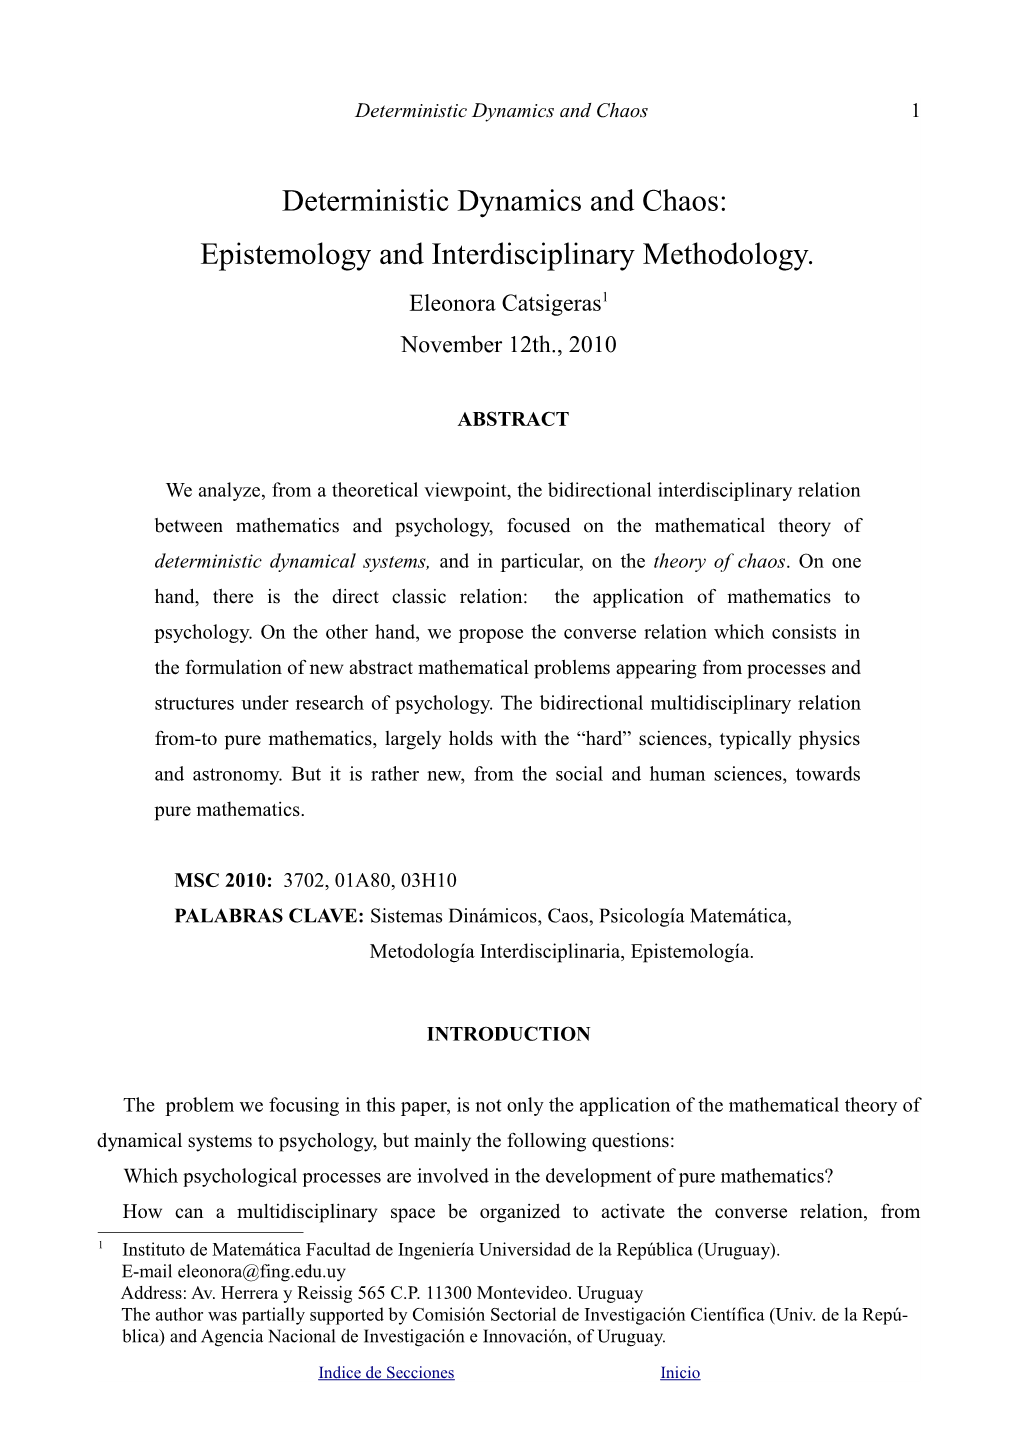 Deterministic Dynamics and Chaos: Epistemology and Interdisciplinary